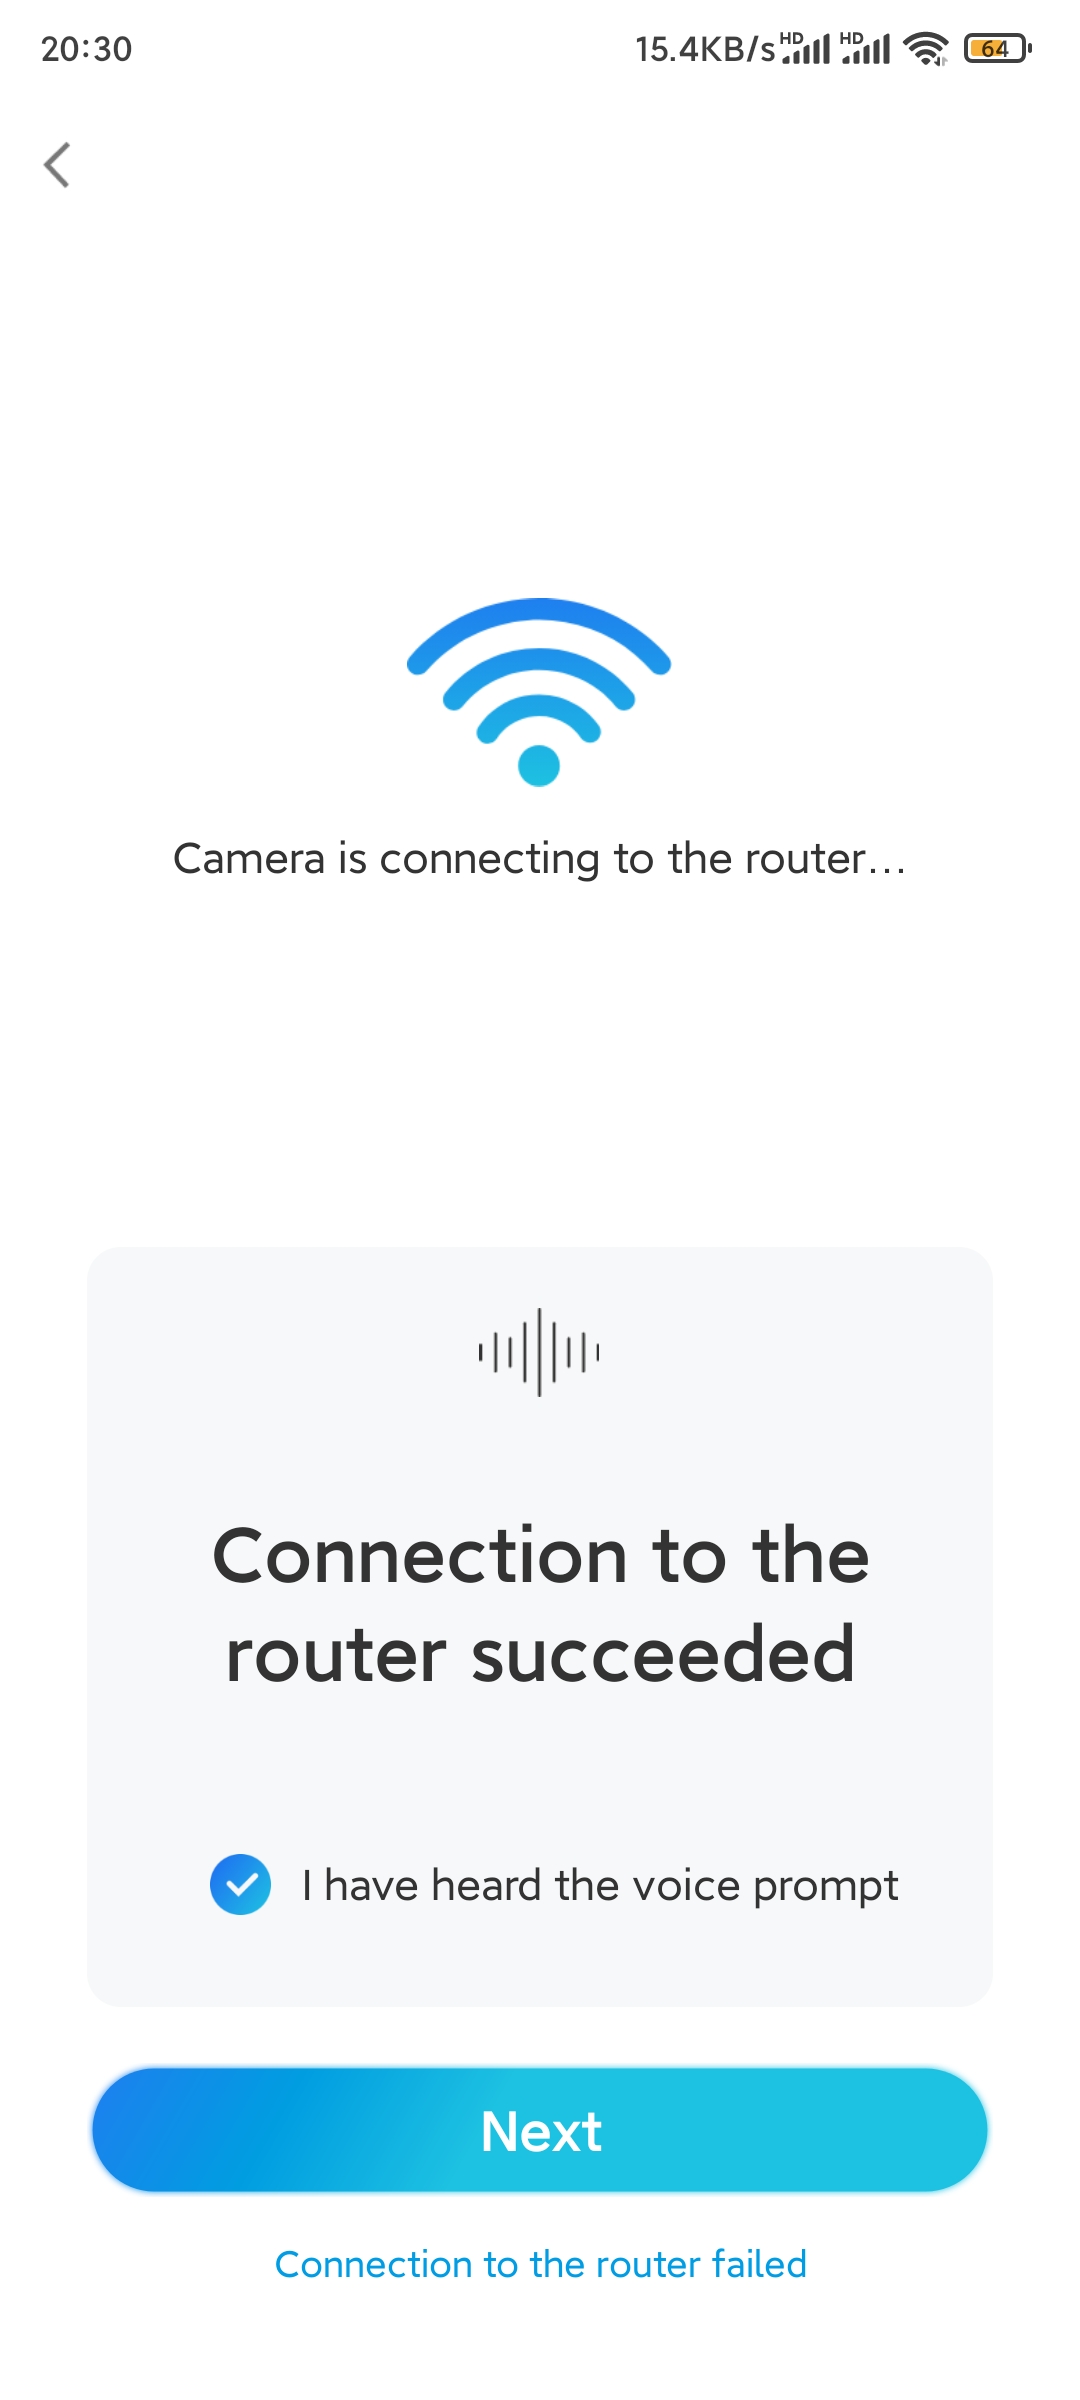 9._Camera_Connected_to_router_successfully.jpg